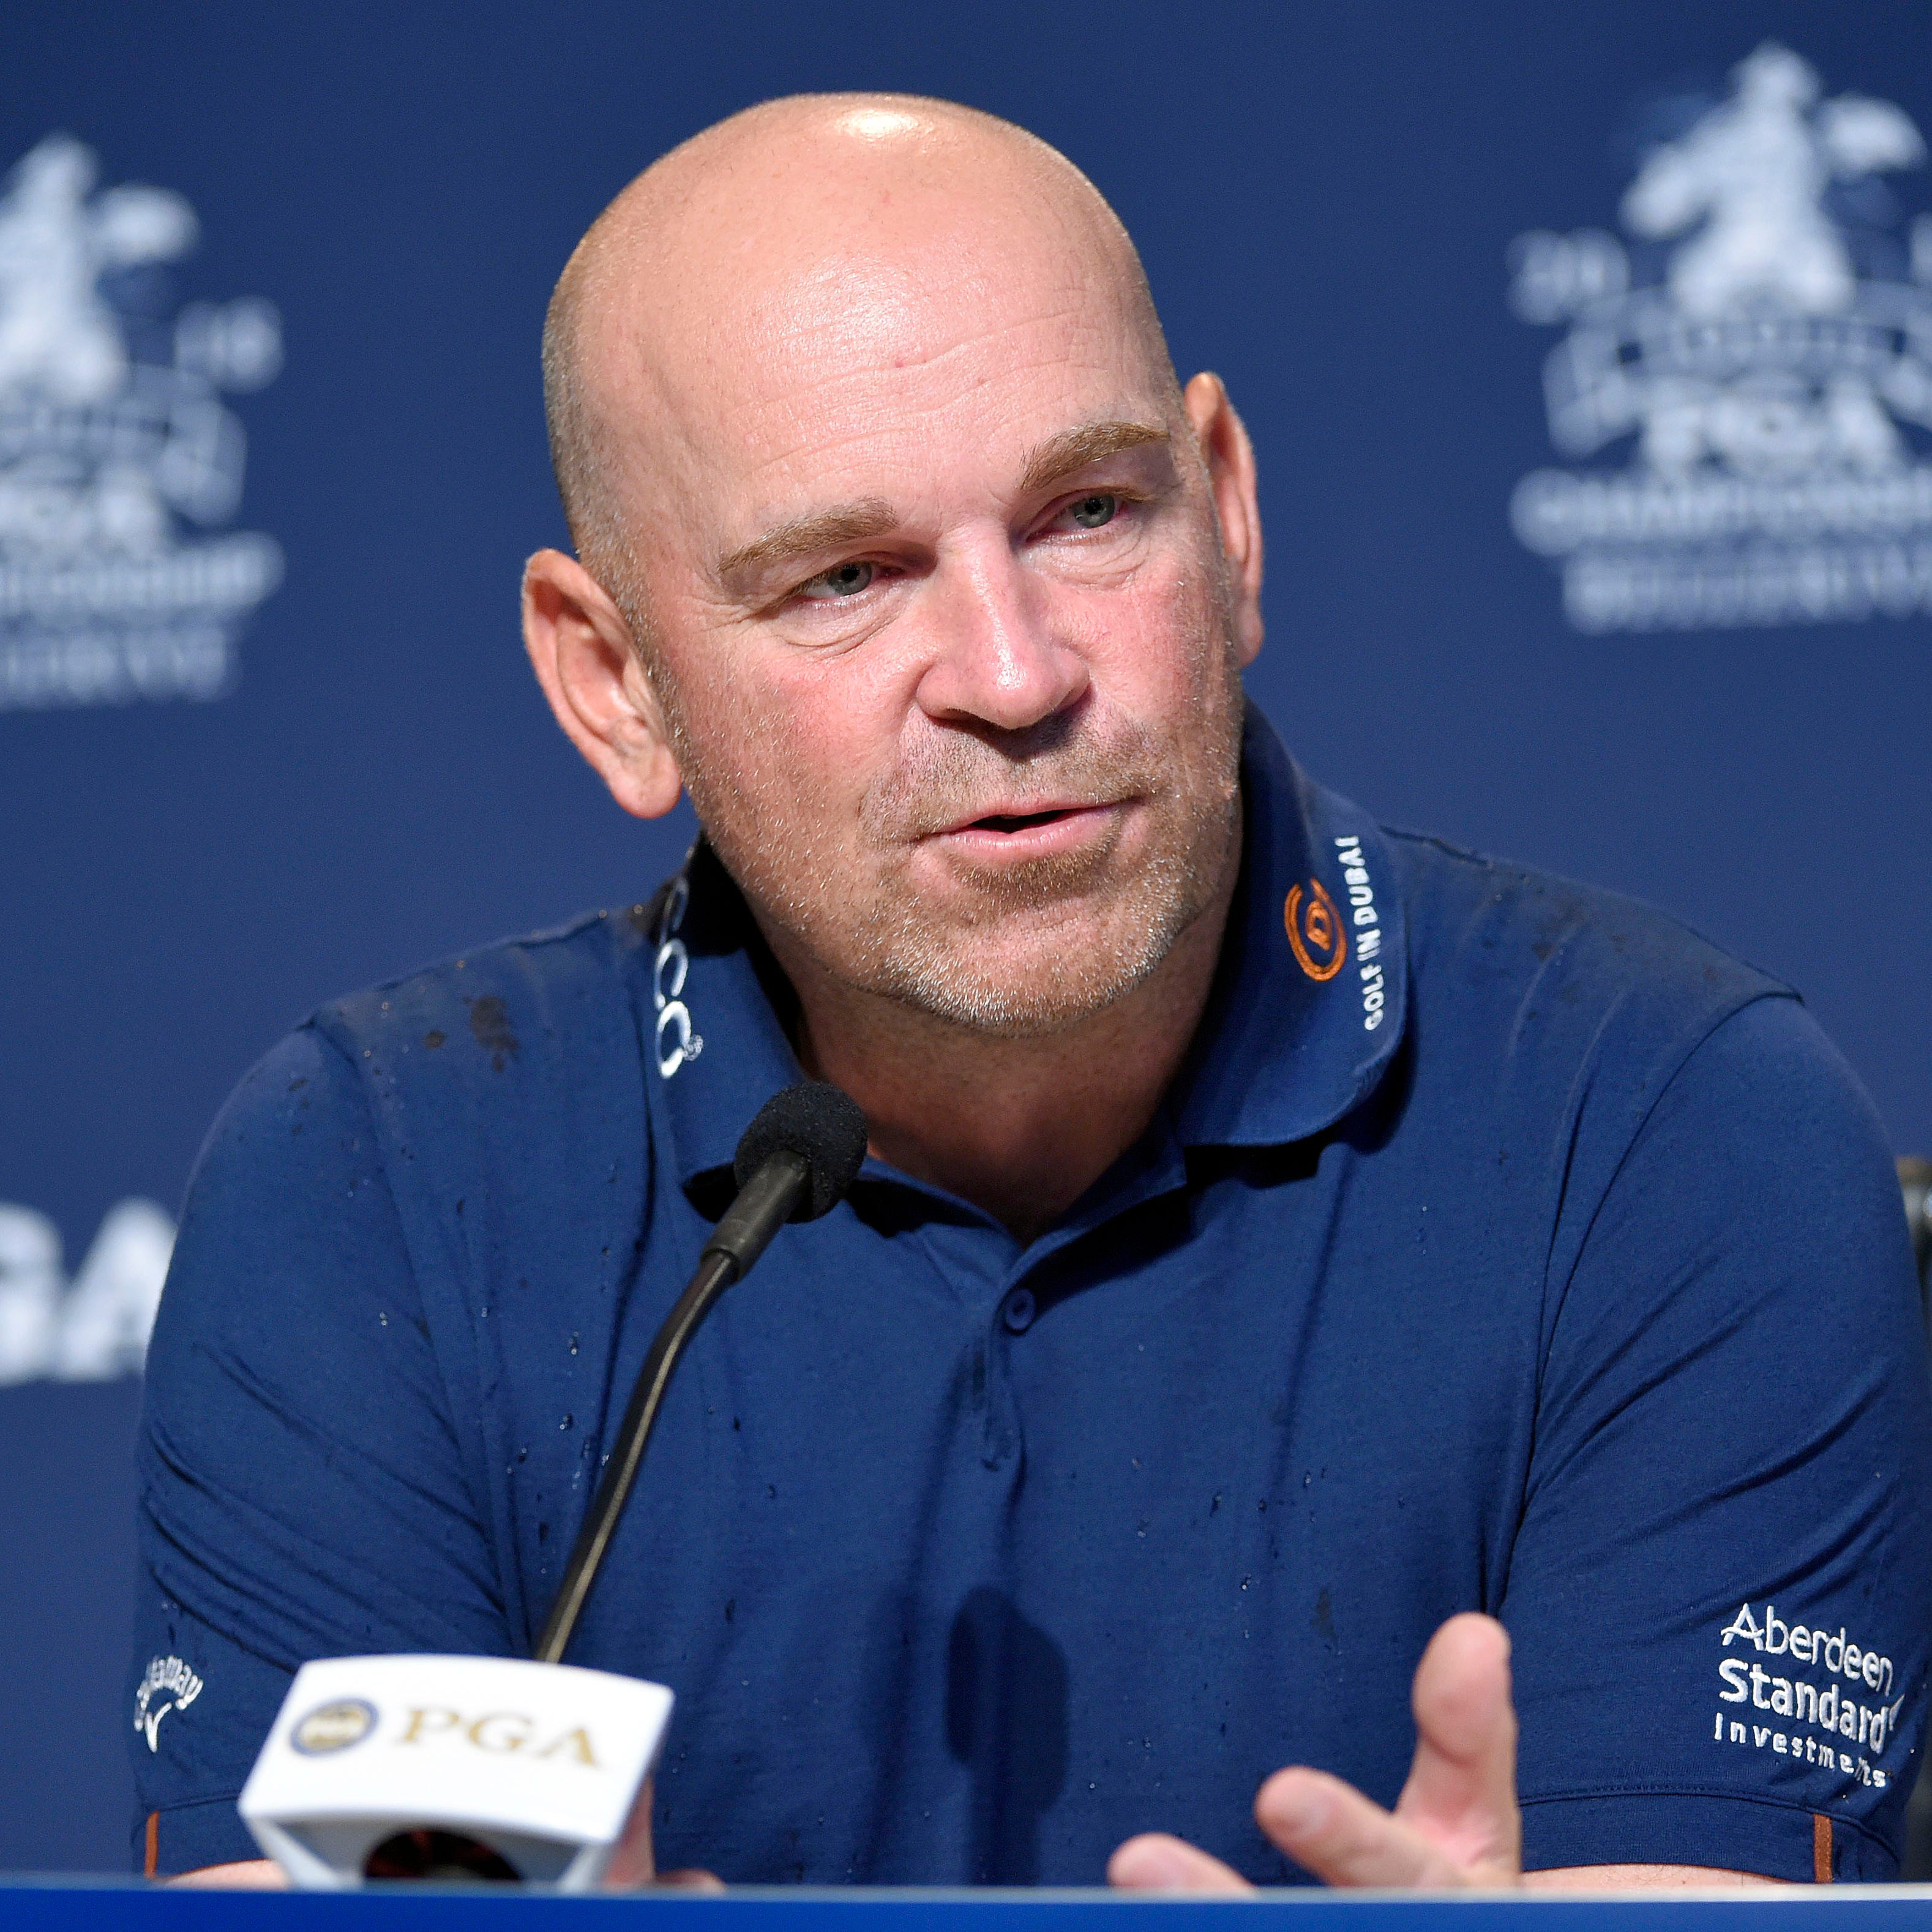 Thomas Bjorn, captain for the 2018 European Ryder Cup team, addresses the media during a press conference before the PGA Championship.